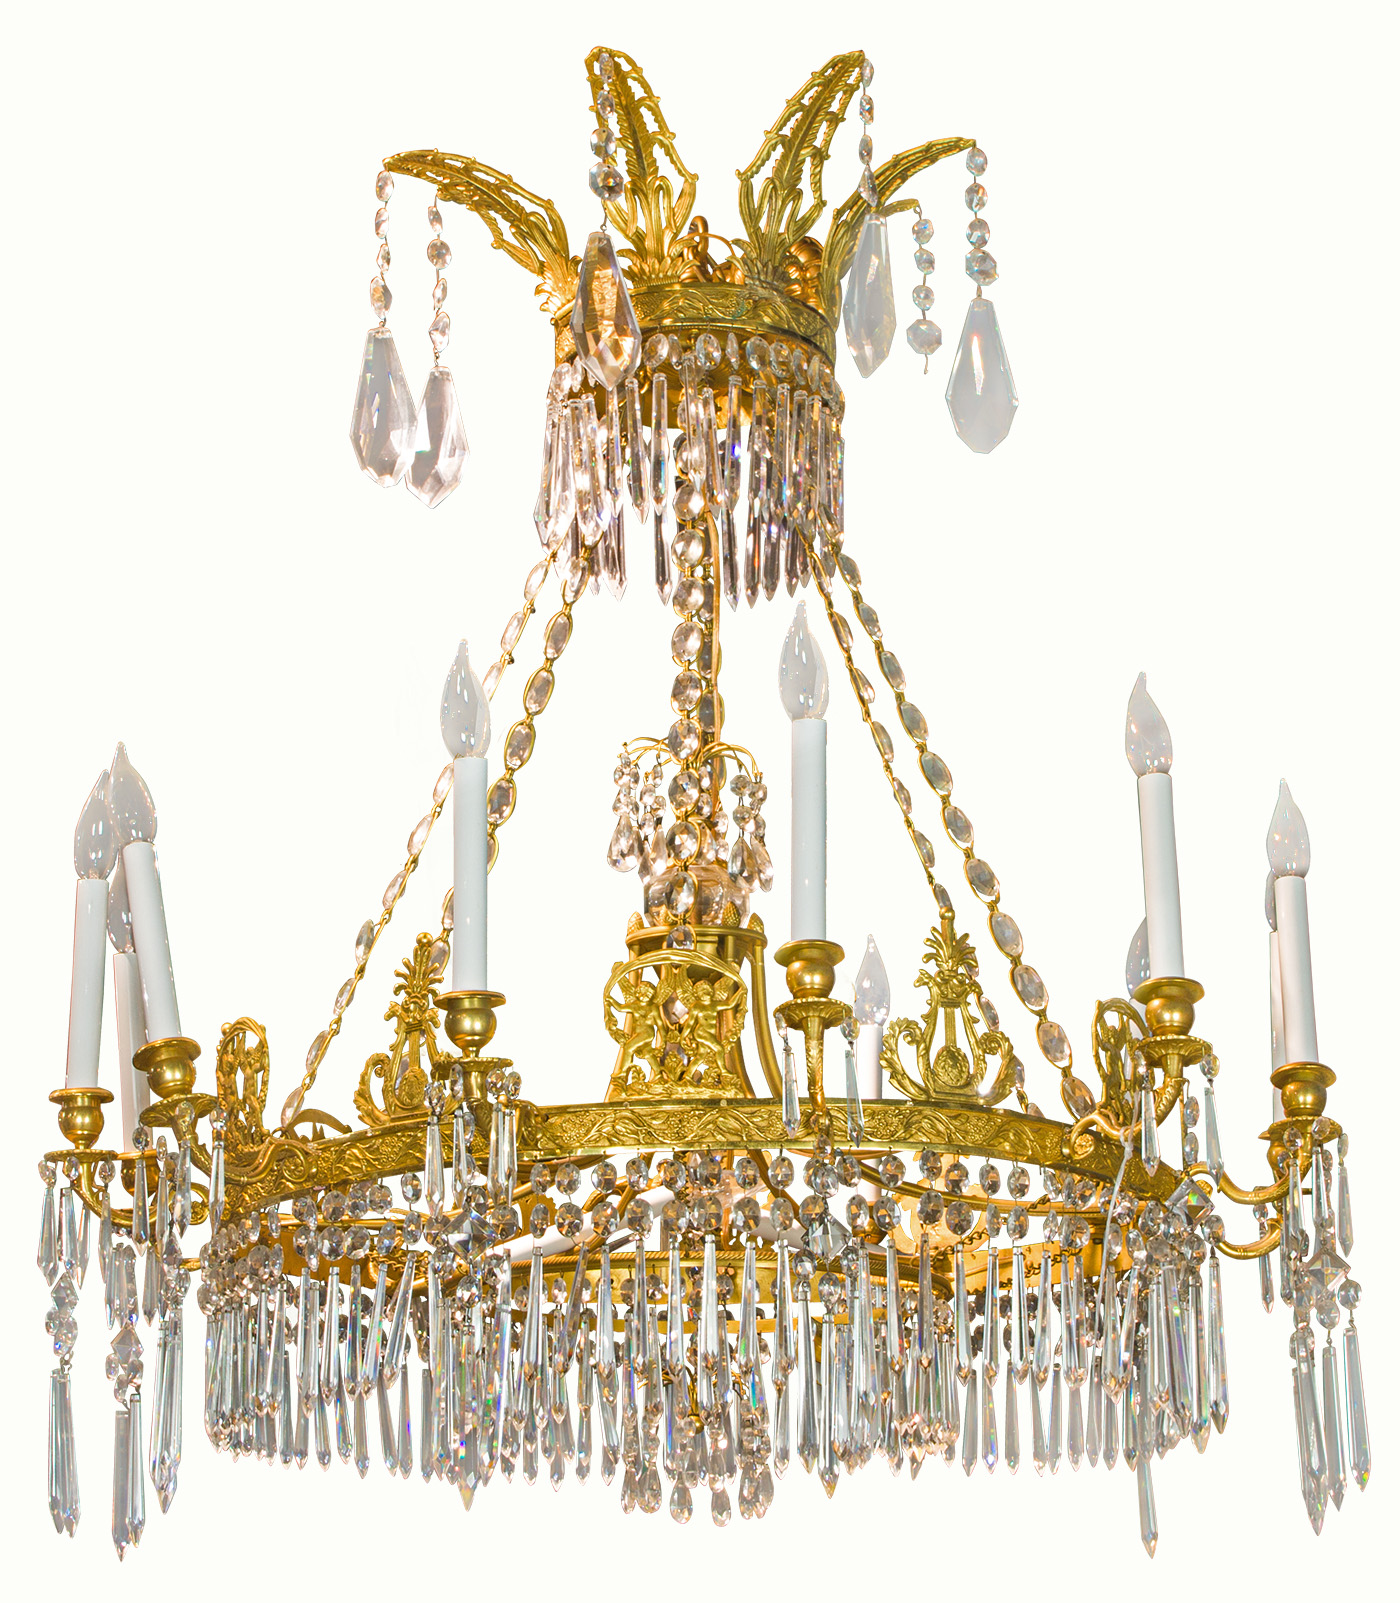 A Russian Napoleonic chandelier.